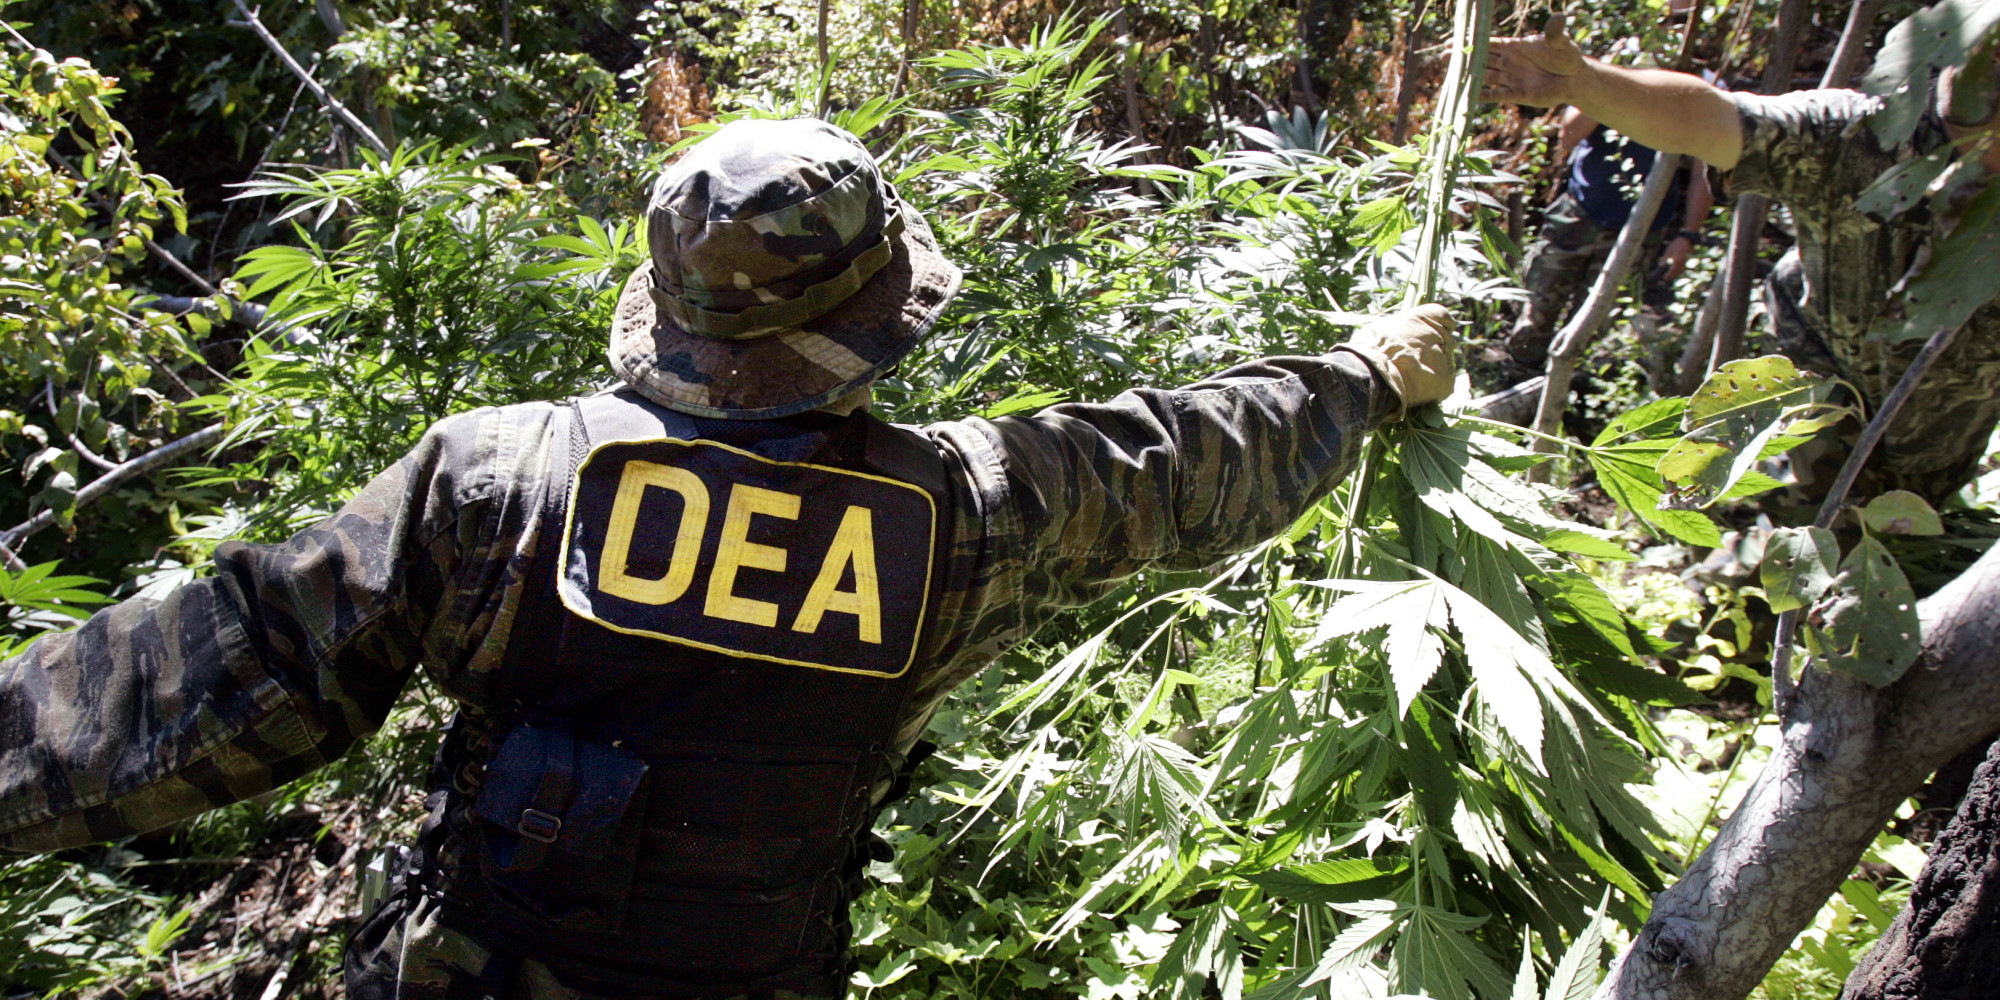 Former Dea Agent Admits Cannabis Laws Are Unjust Dabs Magazine